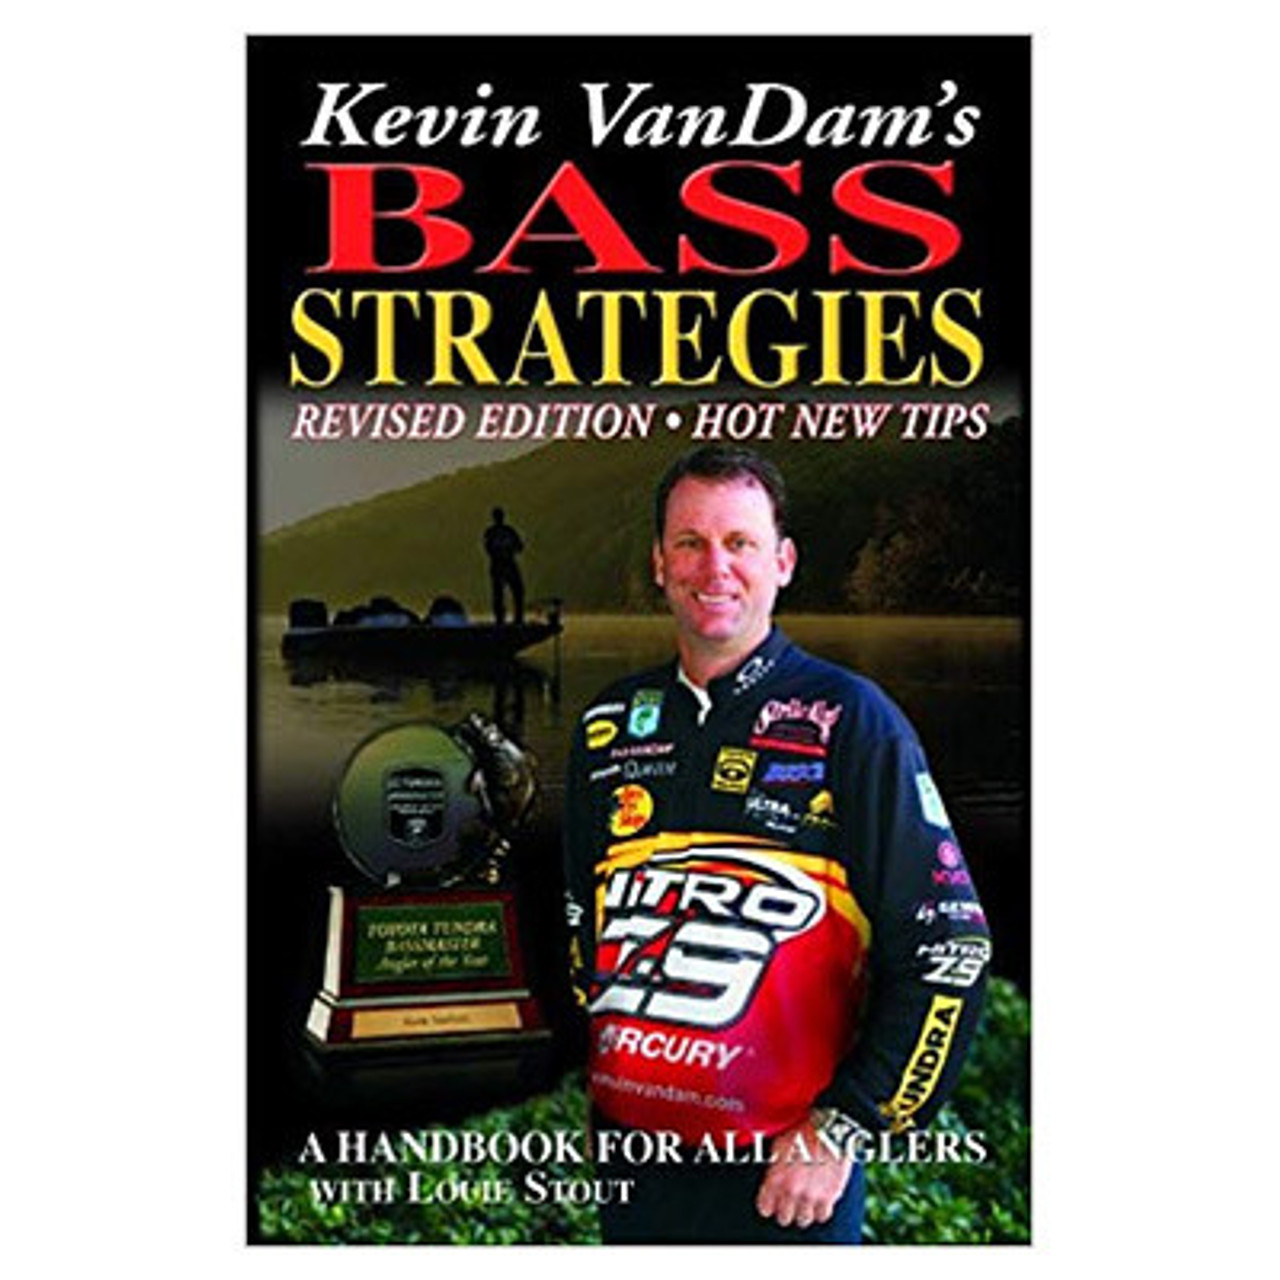 Kevin Vandam's Bass Strategies Revised Edition Book